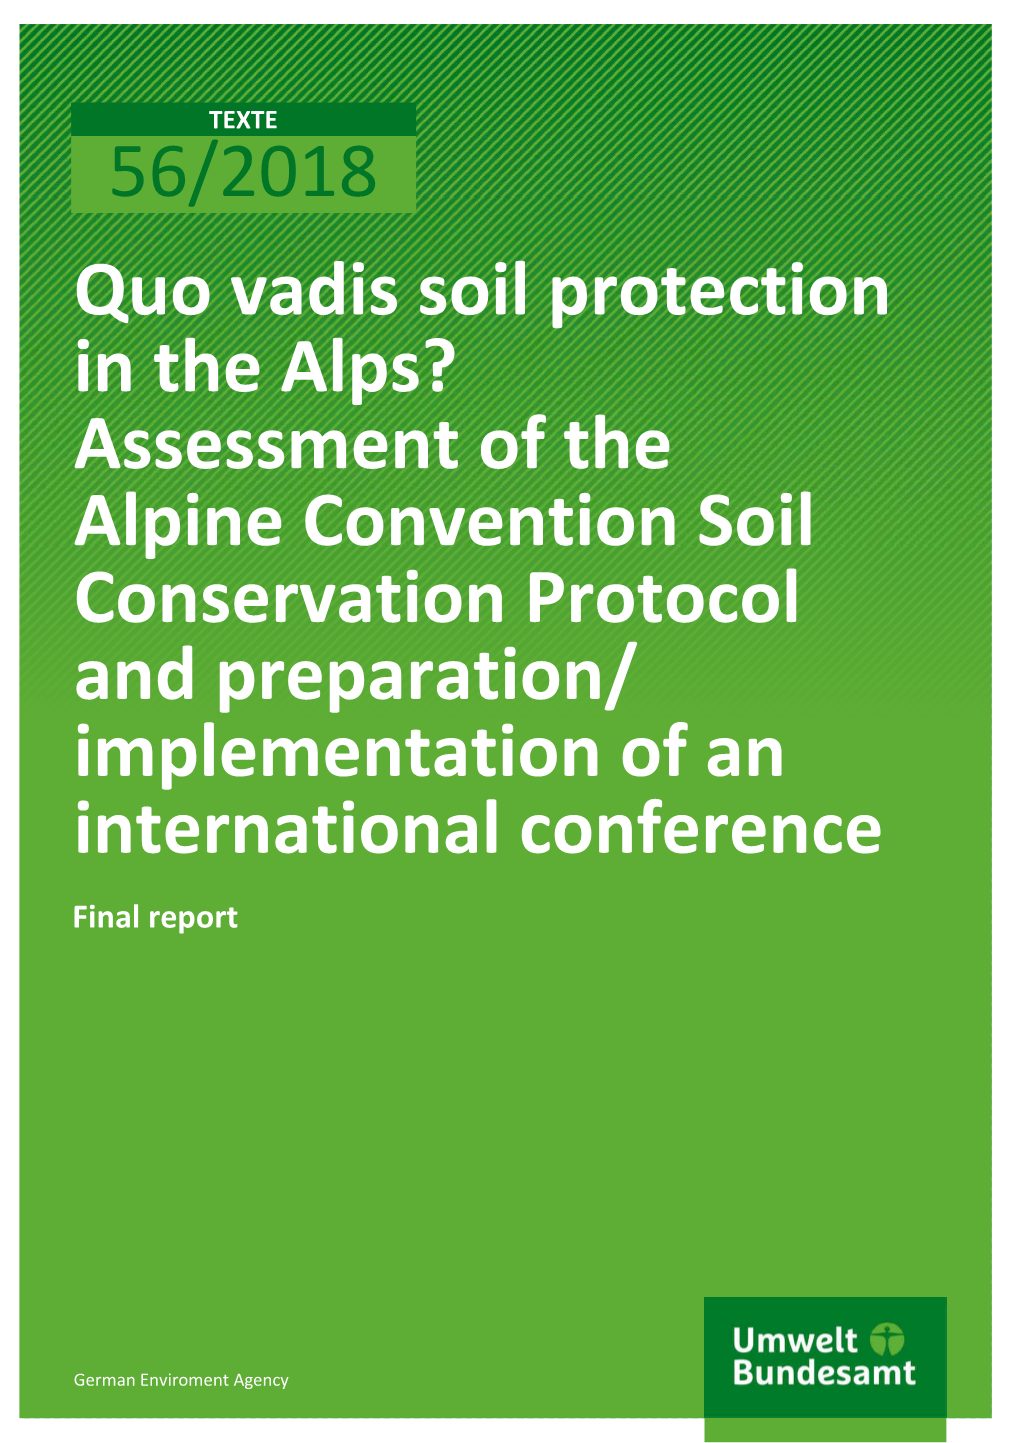 Assessment of the Alpine Convention Soil Conservation Protocol and Preparation/ Implementation of an International Conference Final Report